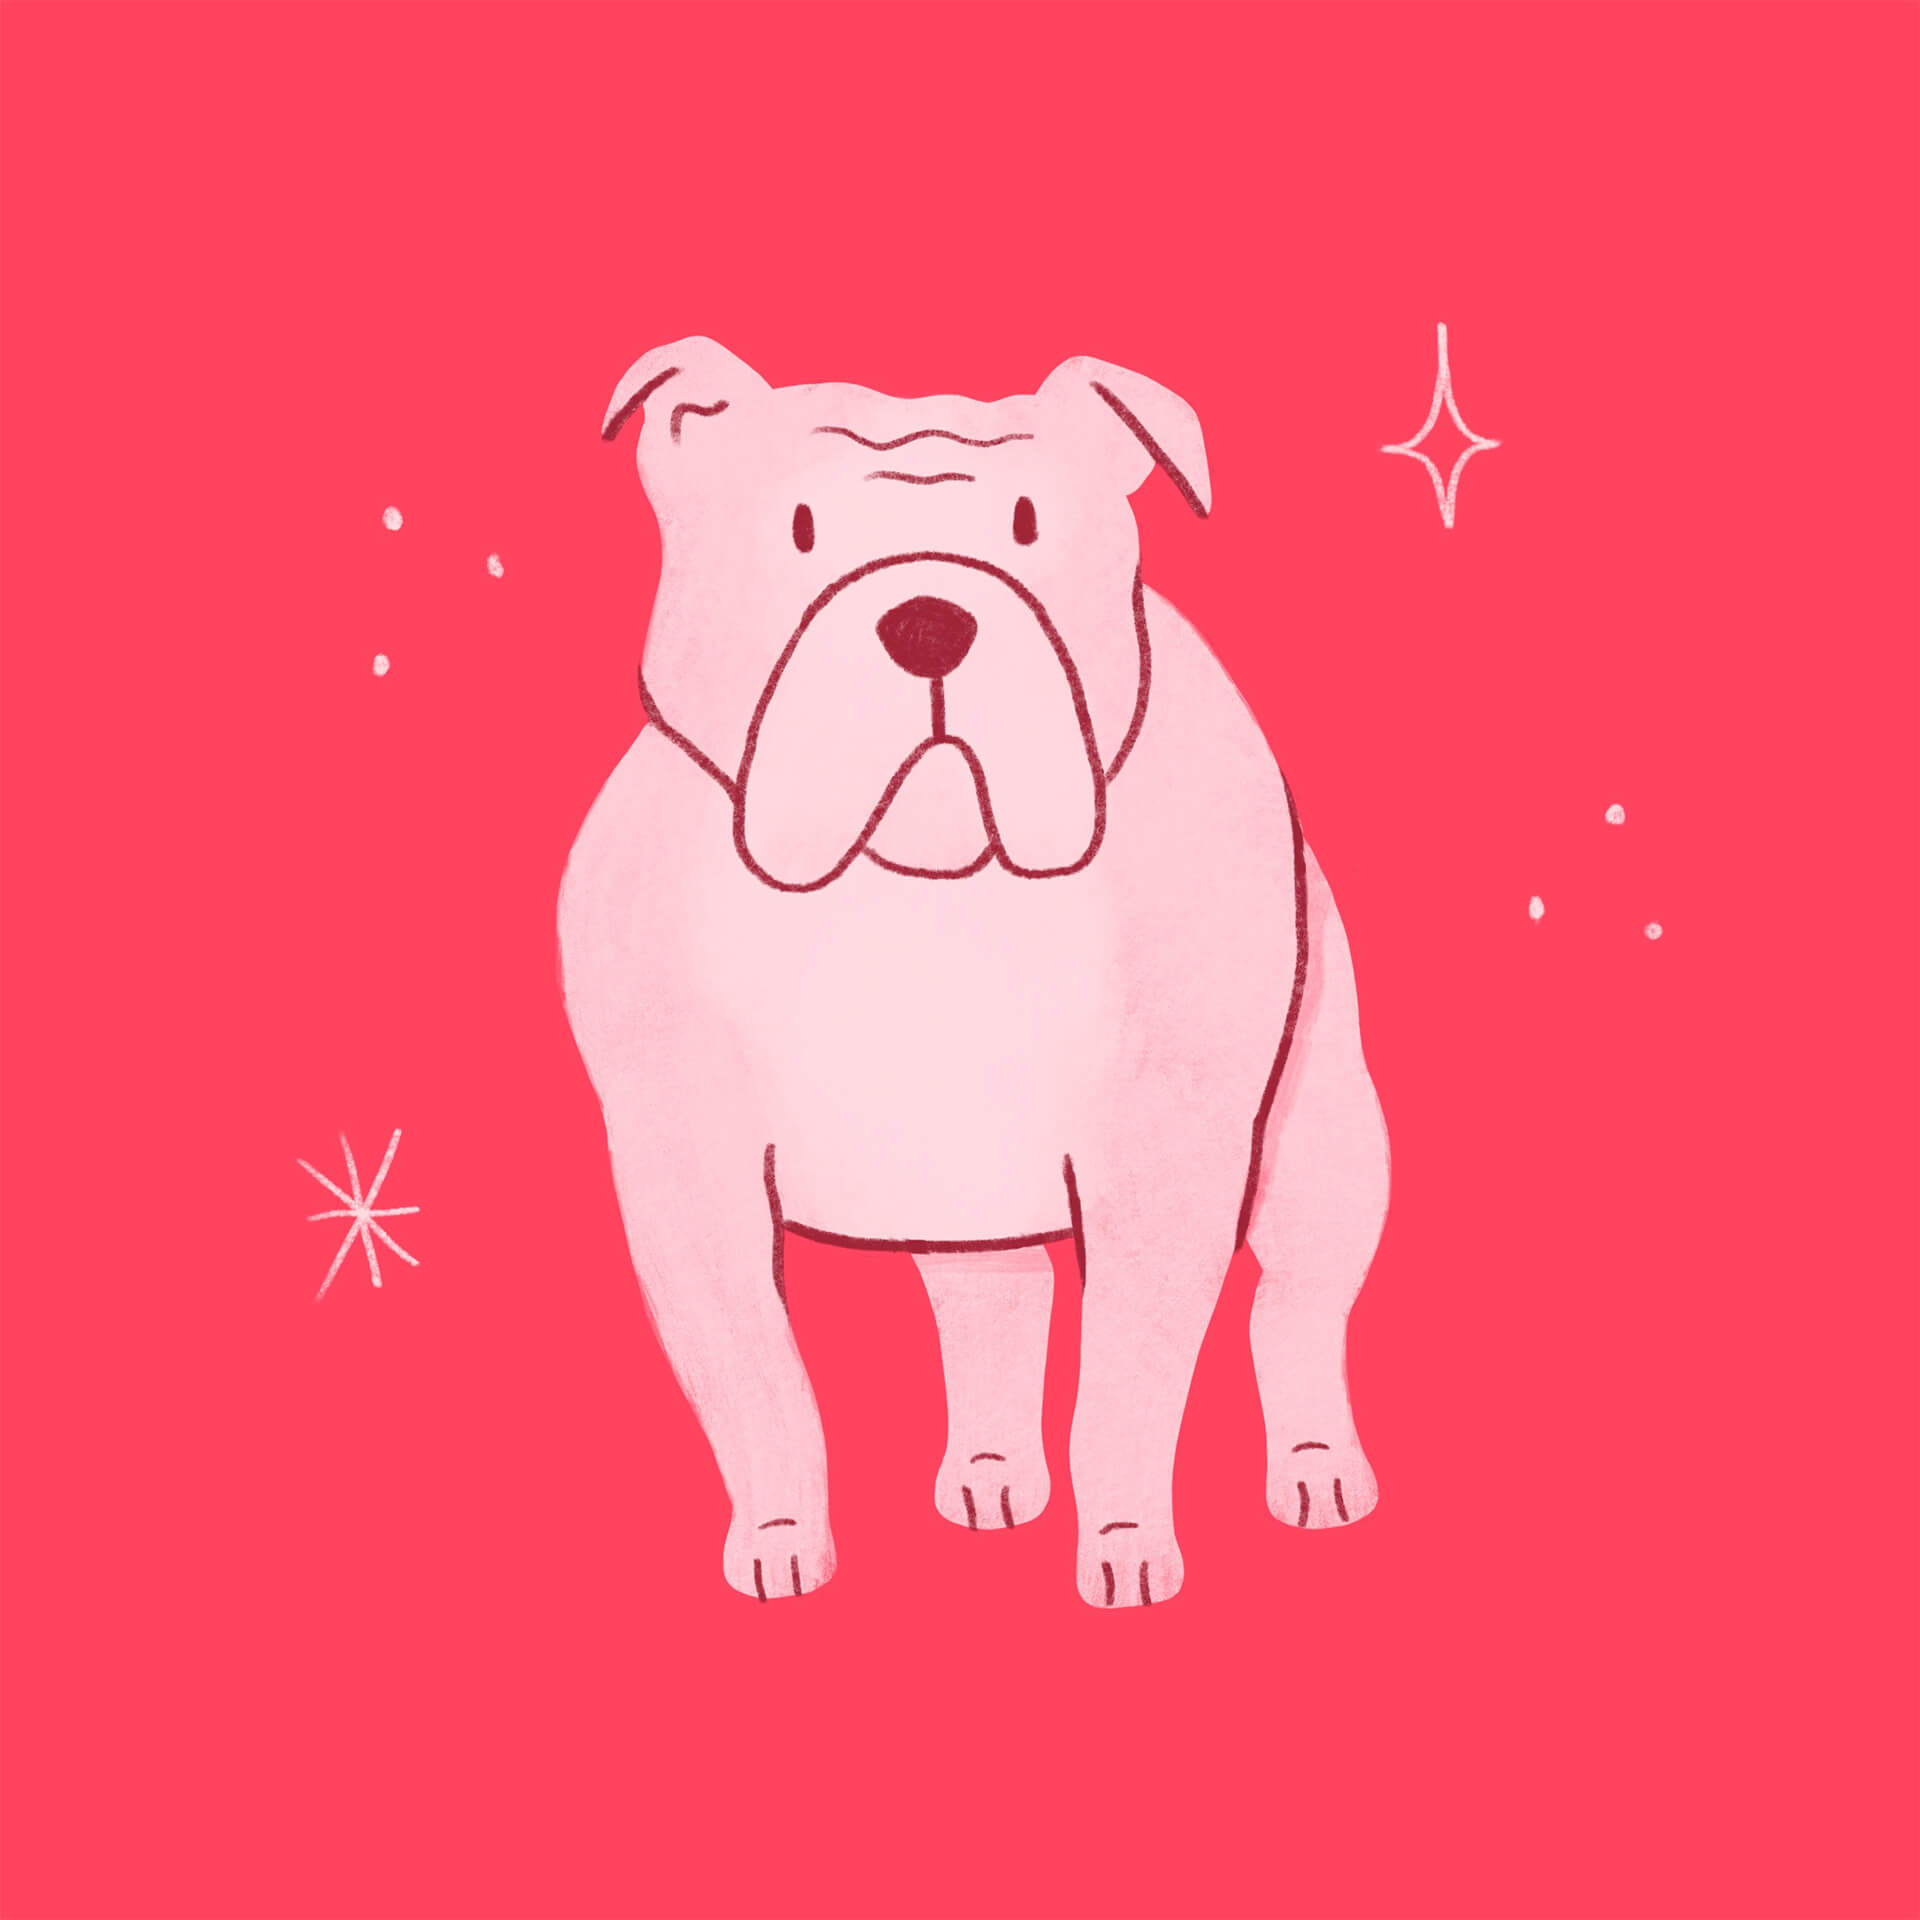 An illustration of a pink bulldog standing and facing the veiwer